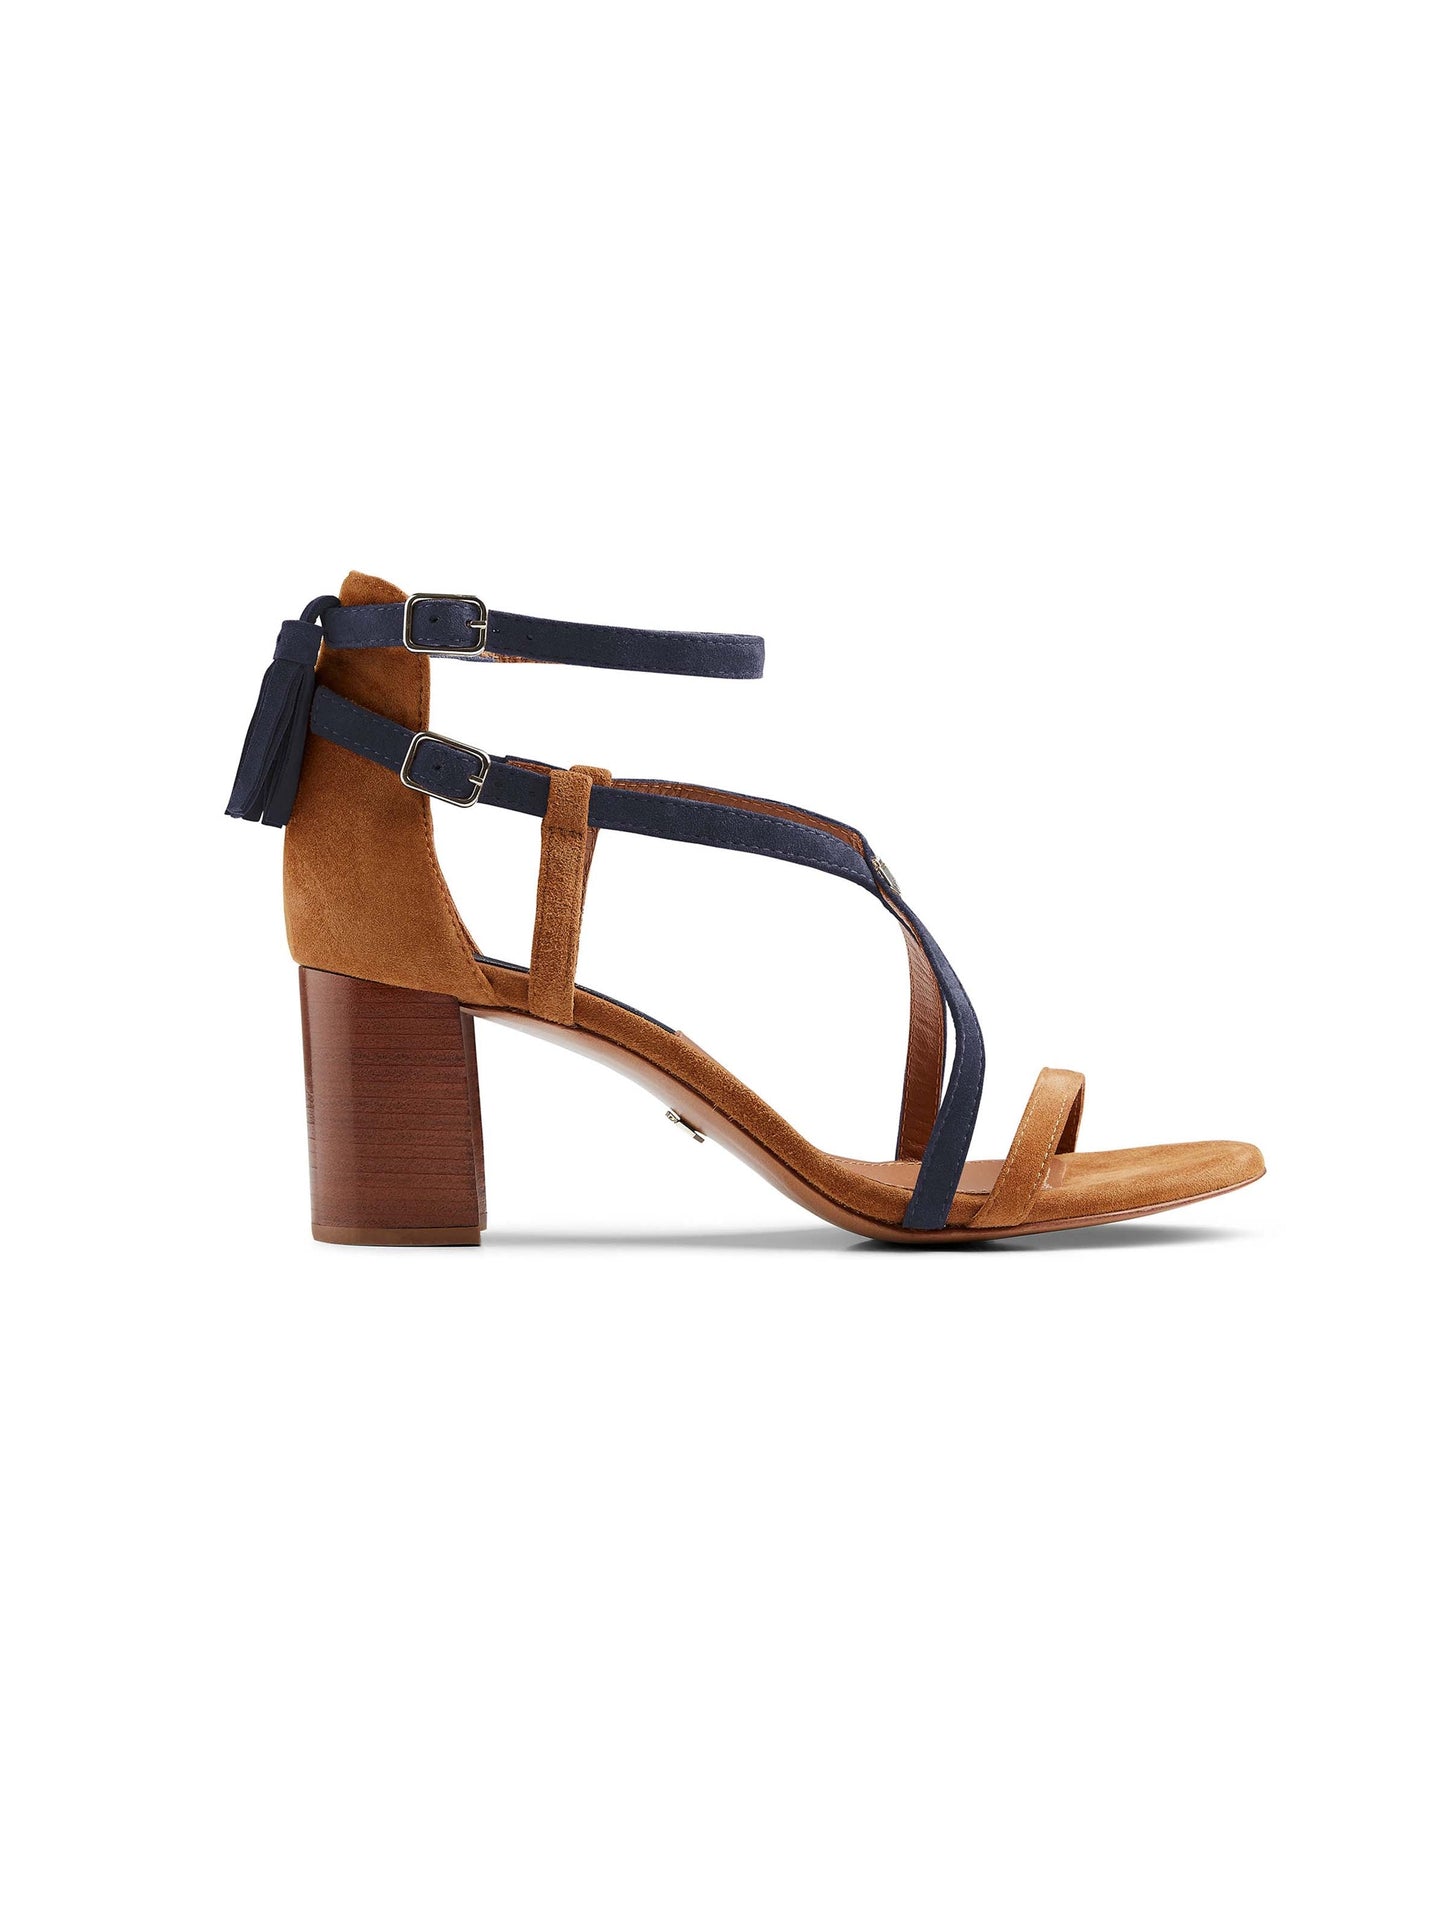 The Heeled Brancaster Sandal - Tan & Navy Suede